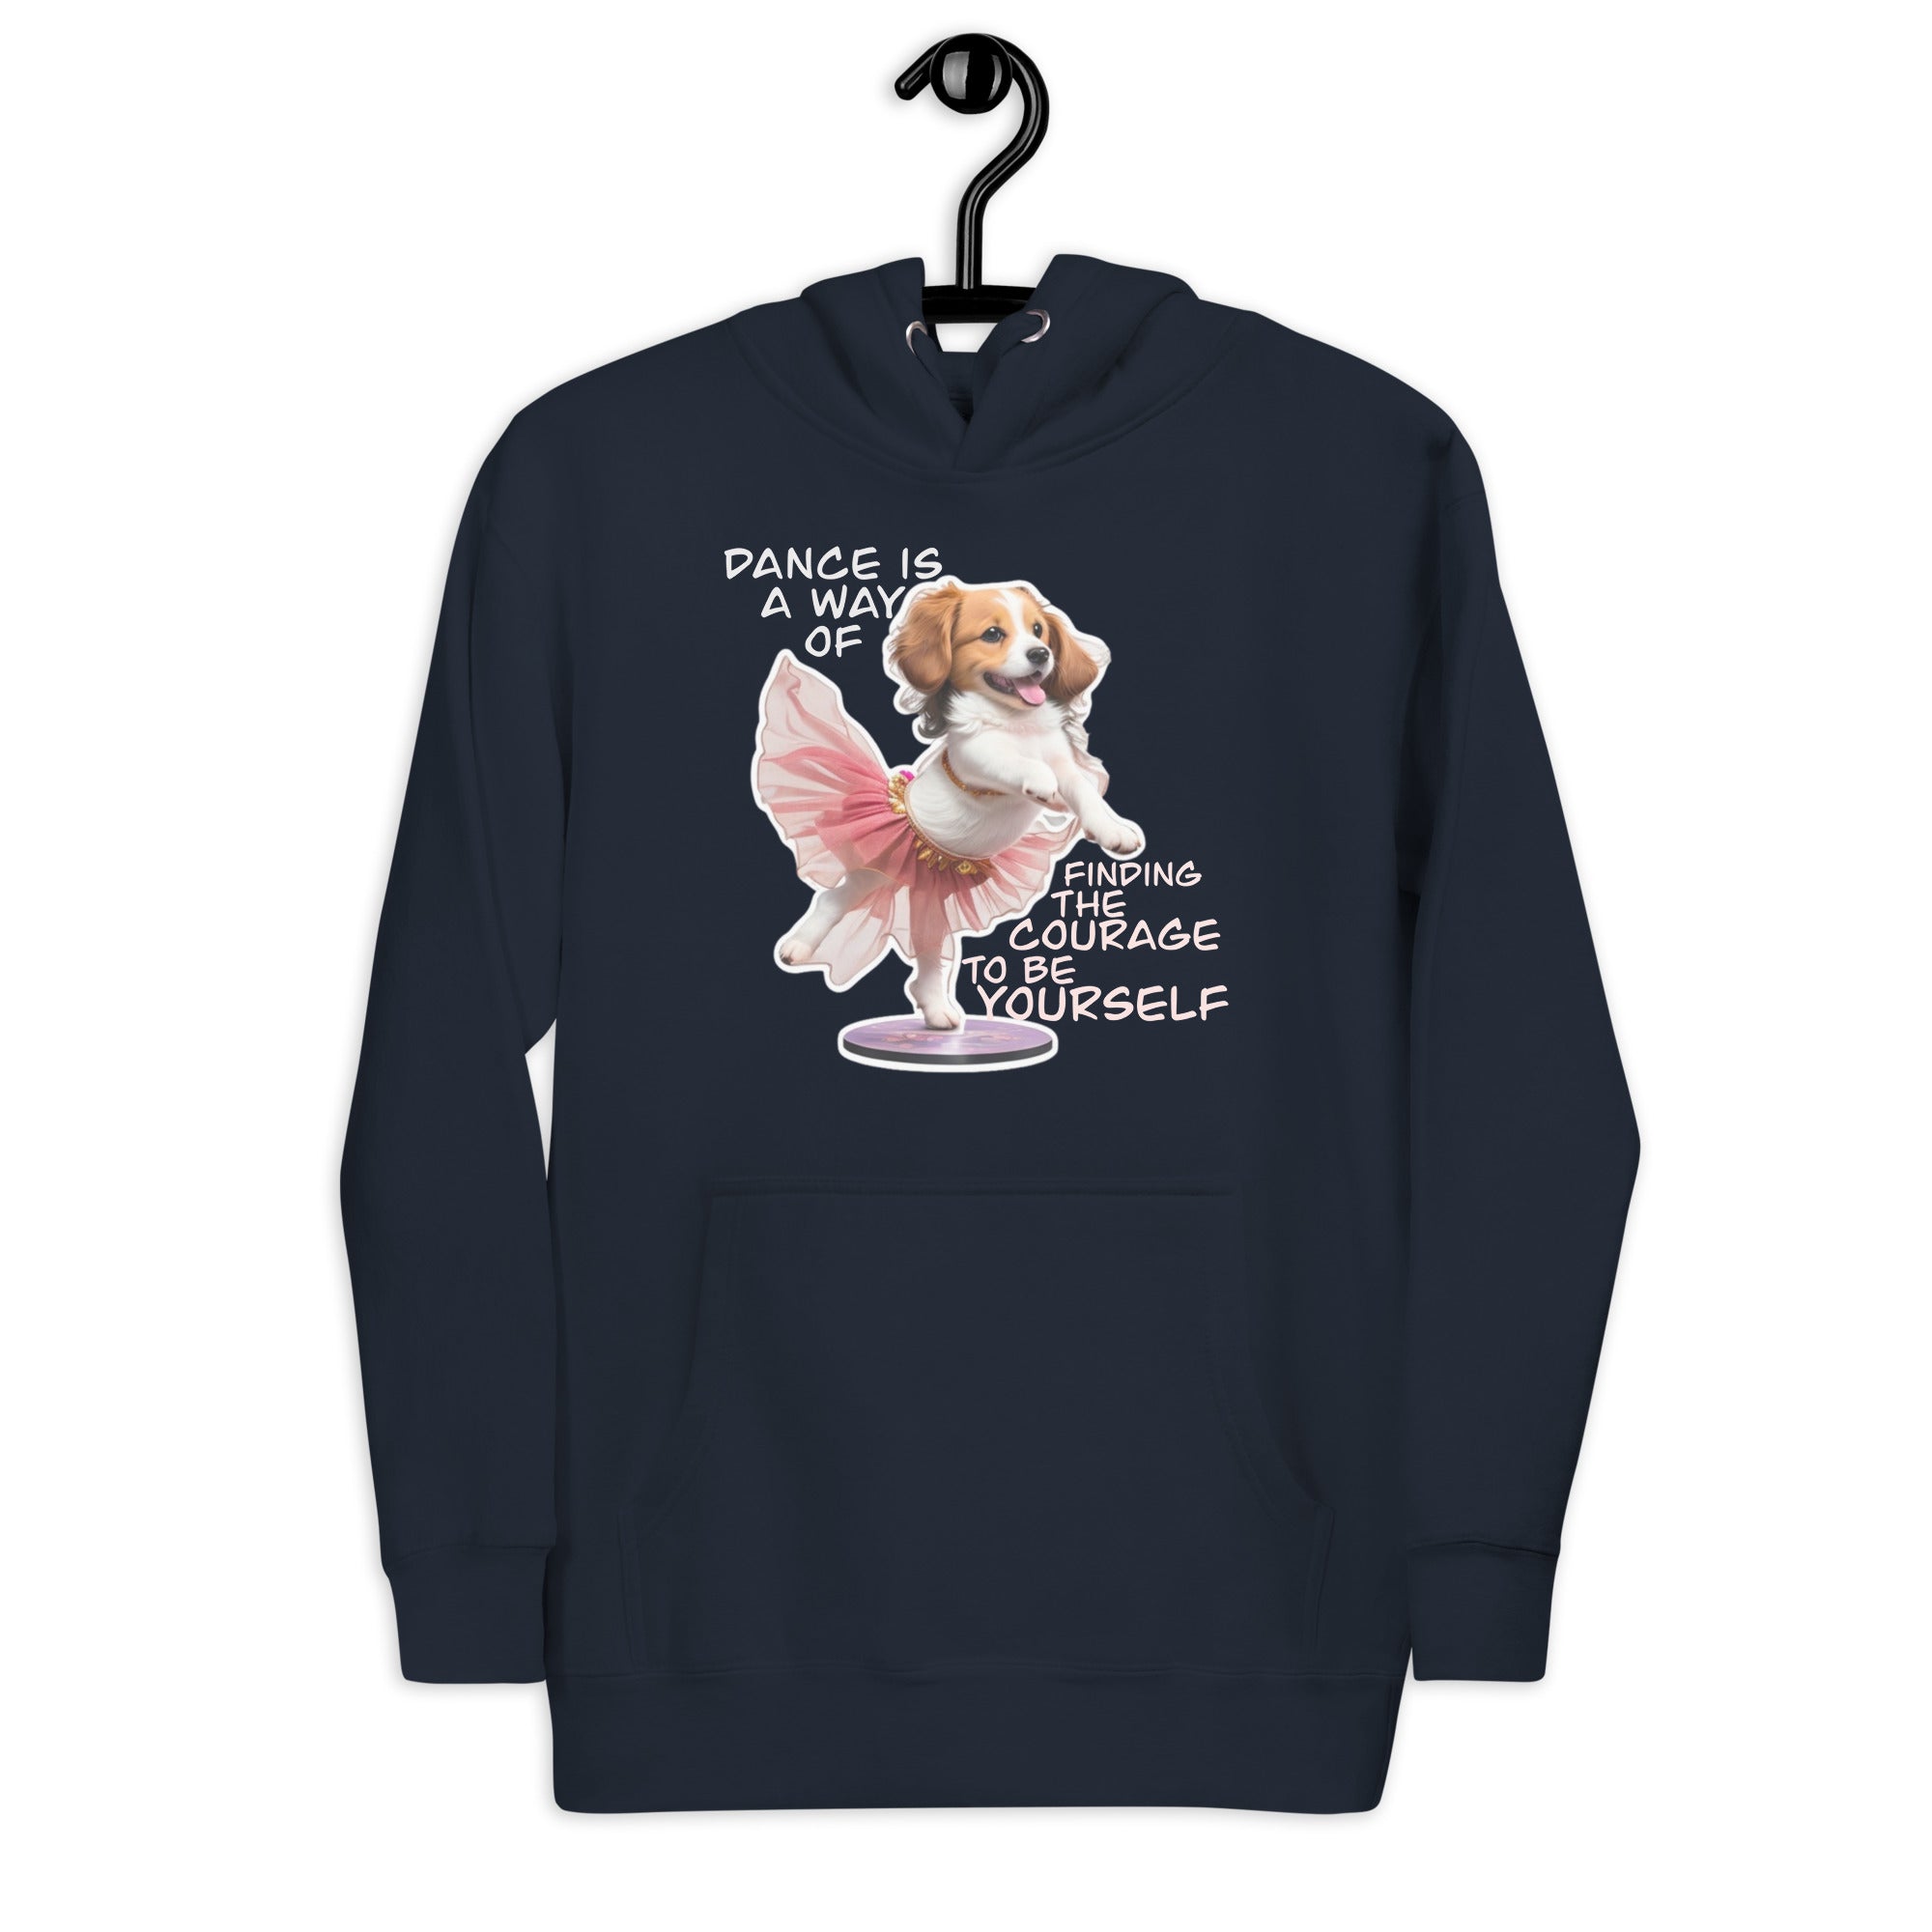 Dance is a Way of Finding the Courage to be Yourself - Premium Hoodie